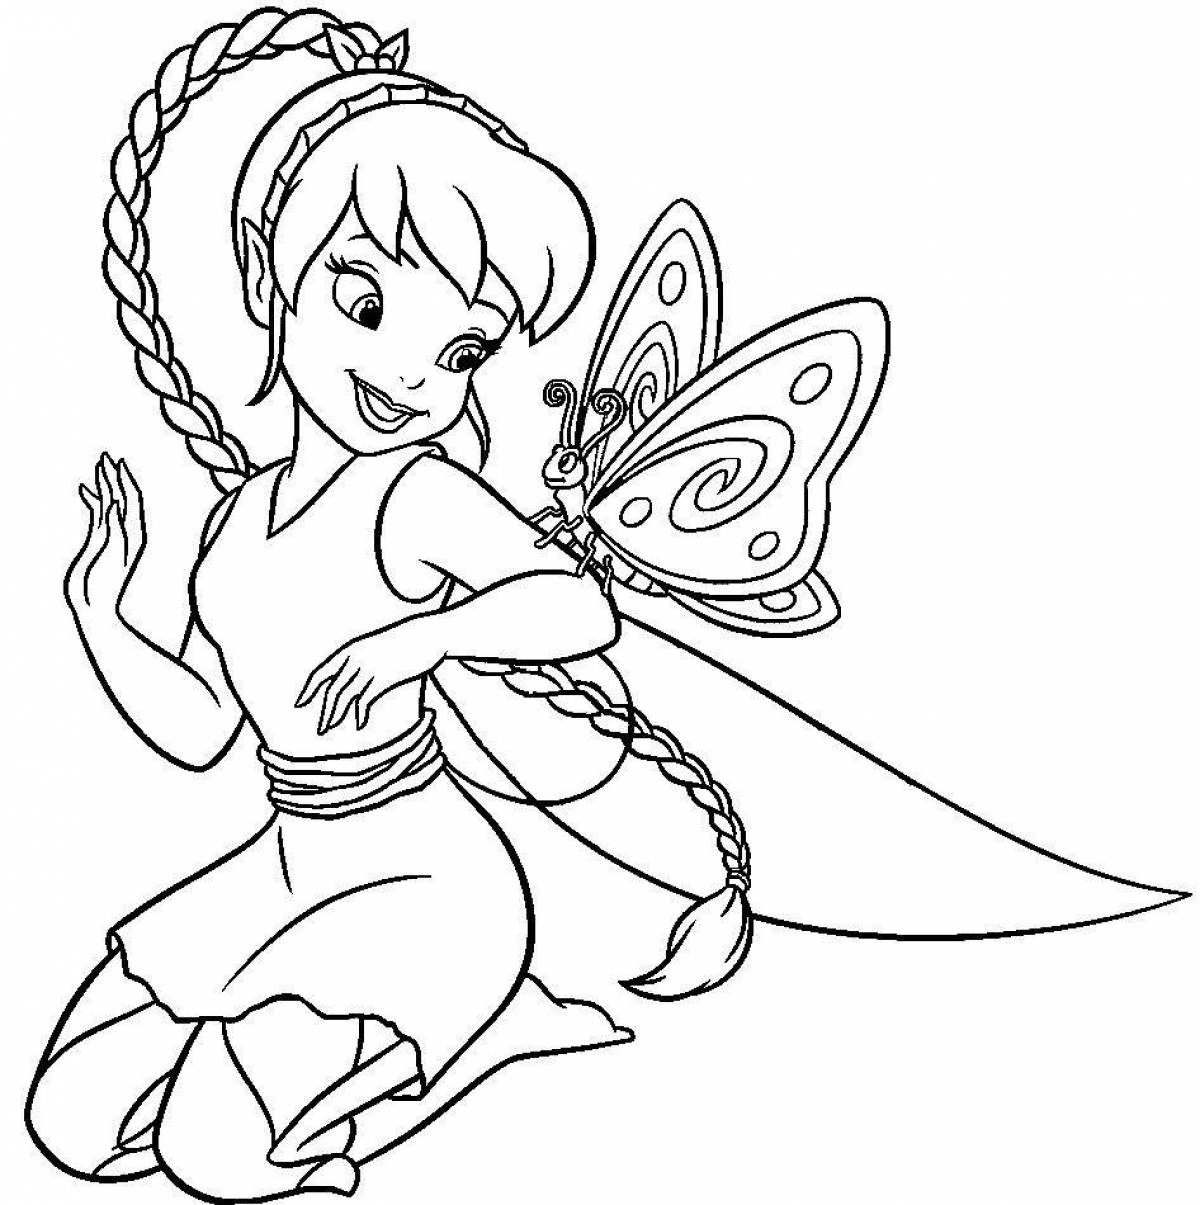 Amazing fairy coloring pages for 5-6 year olds